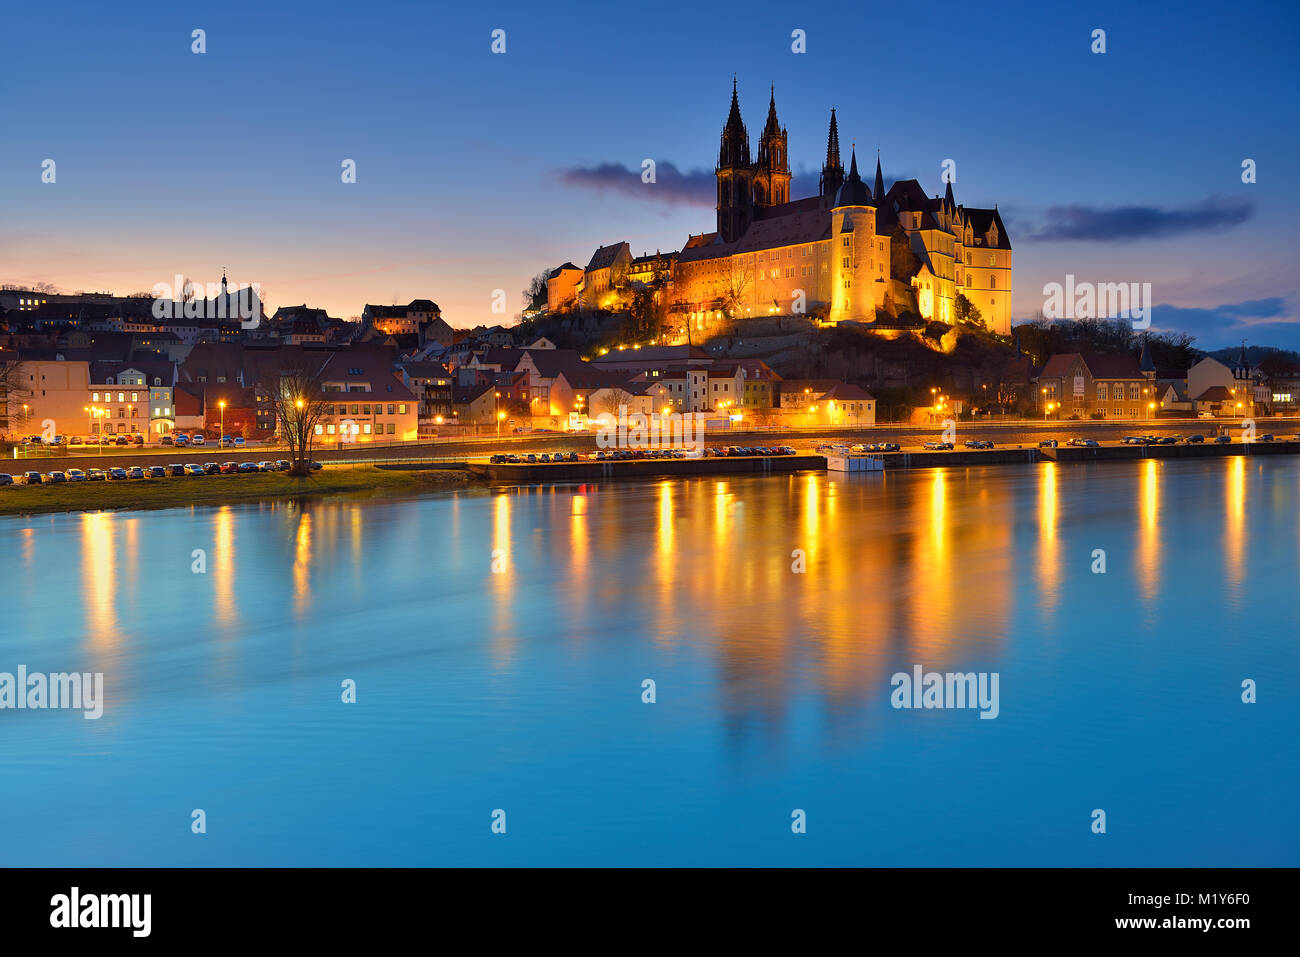 Burgberg with cathedral and castle Albrechtsburg reflected in the river Elbe, Dämmerung, Meißen, Saxony, Germany Stock Photo